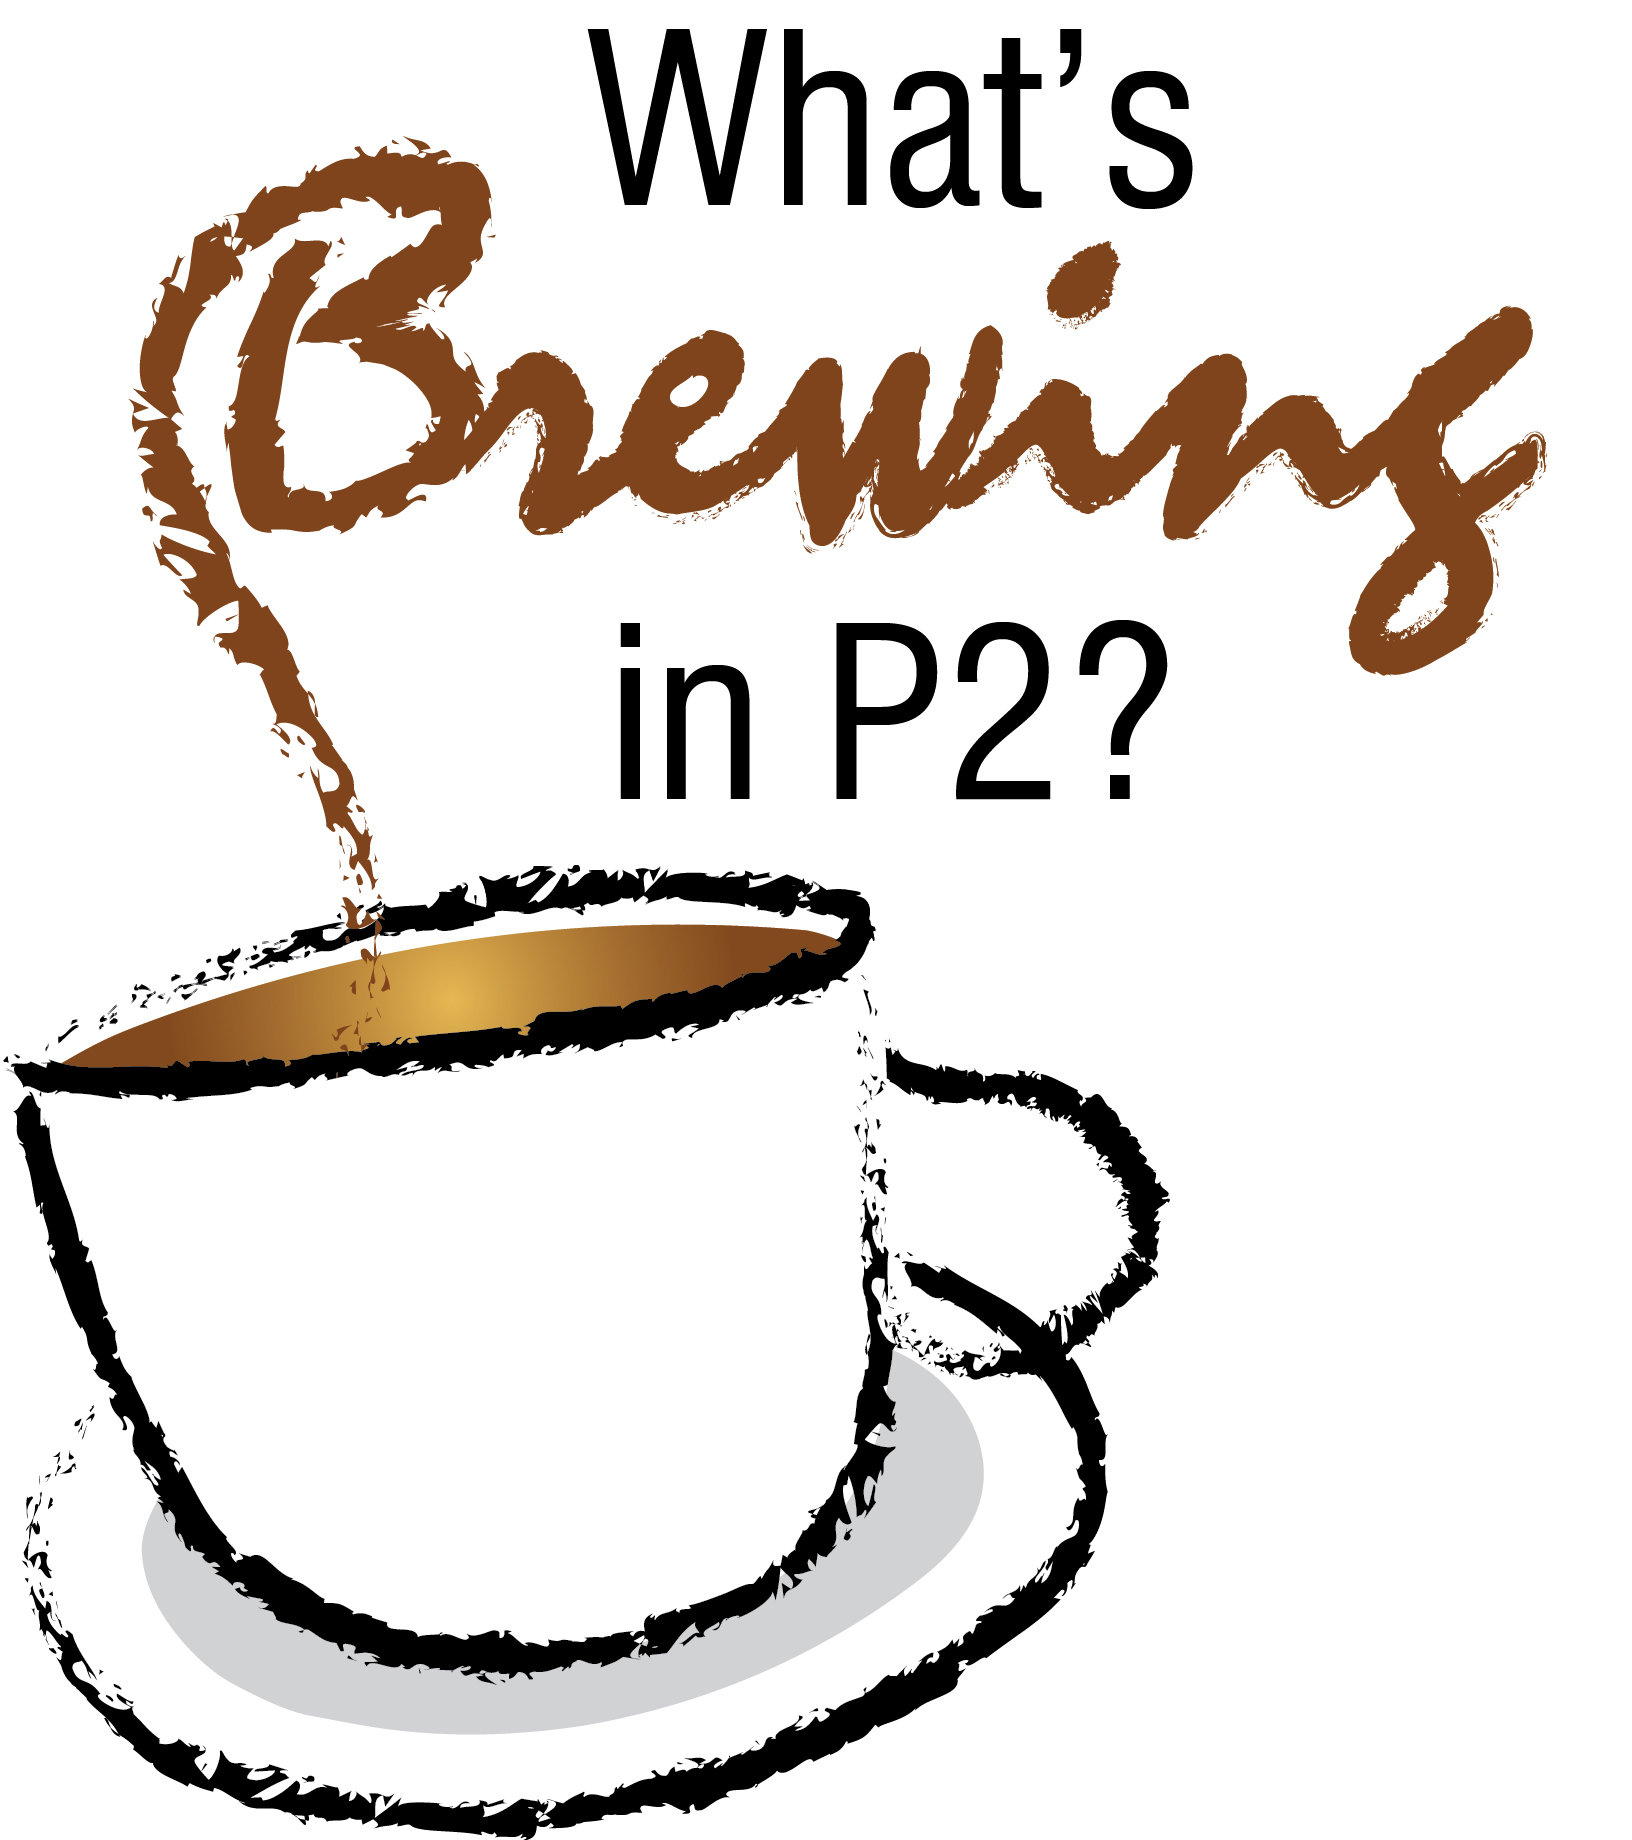 What's Brewing in P2?